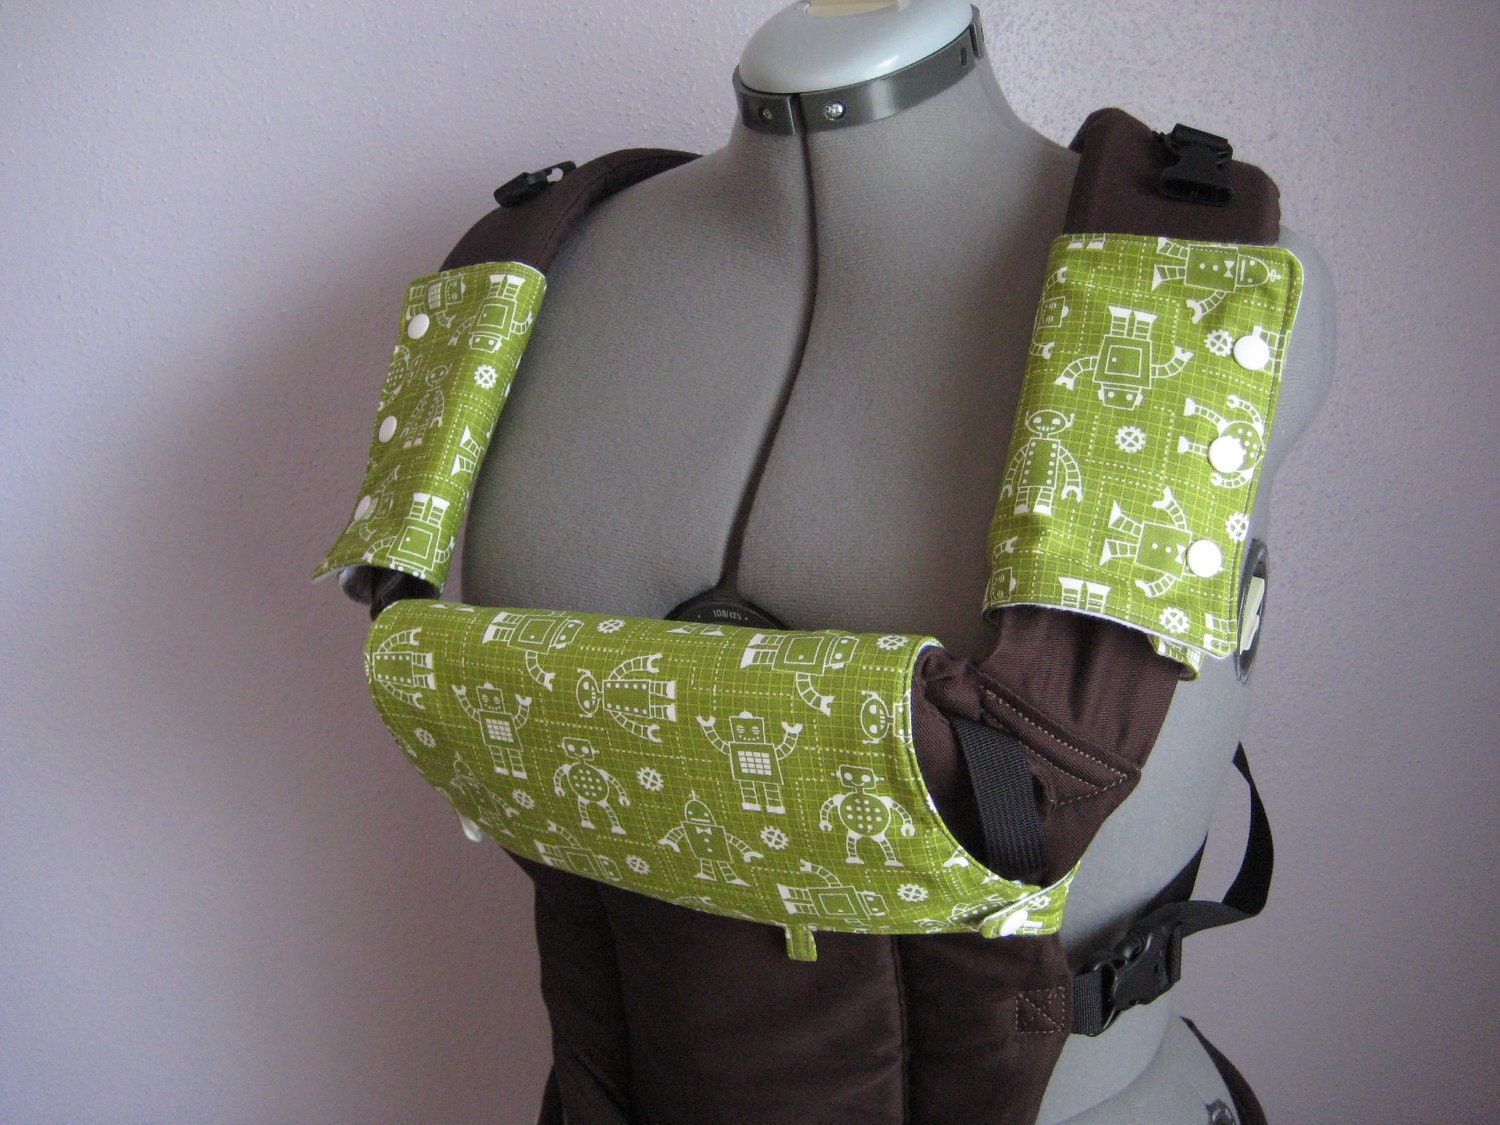 Made to Order Drool Pads and Bib for a Beco Carrier